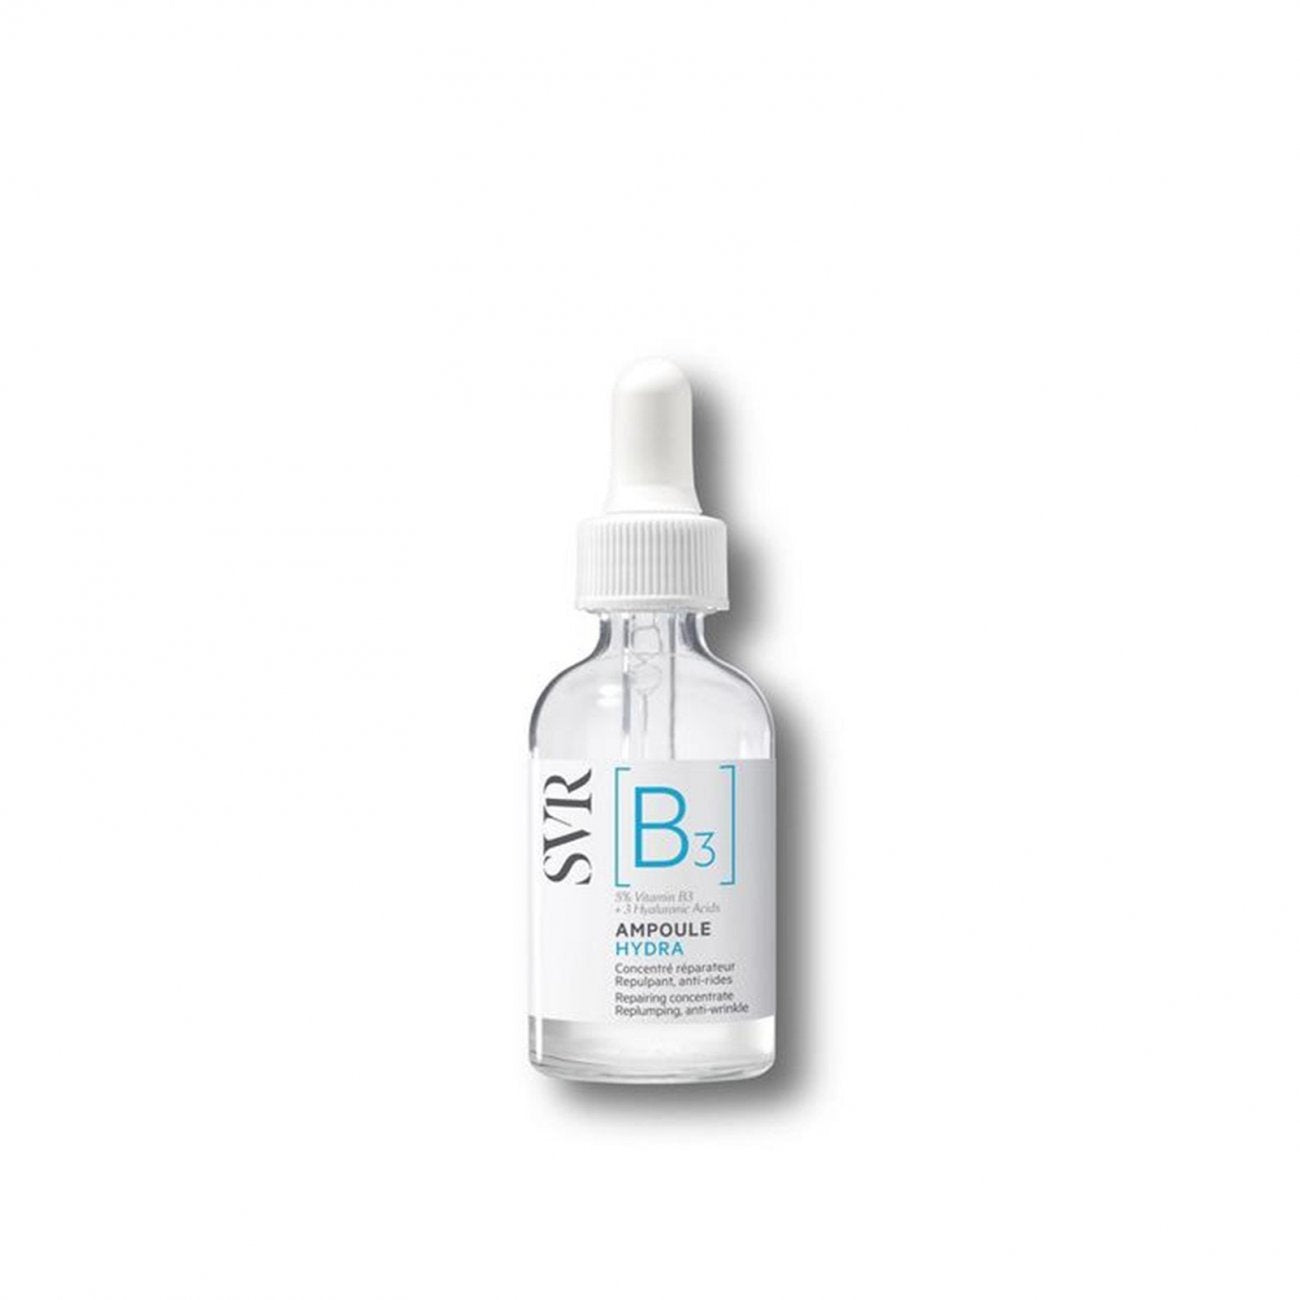 SVR [B3] Ampoule Hydra Concentrate Repair 30ml